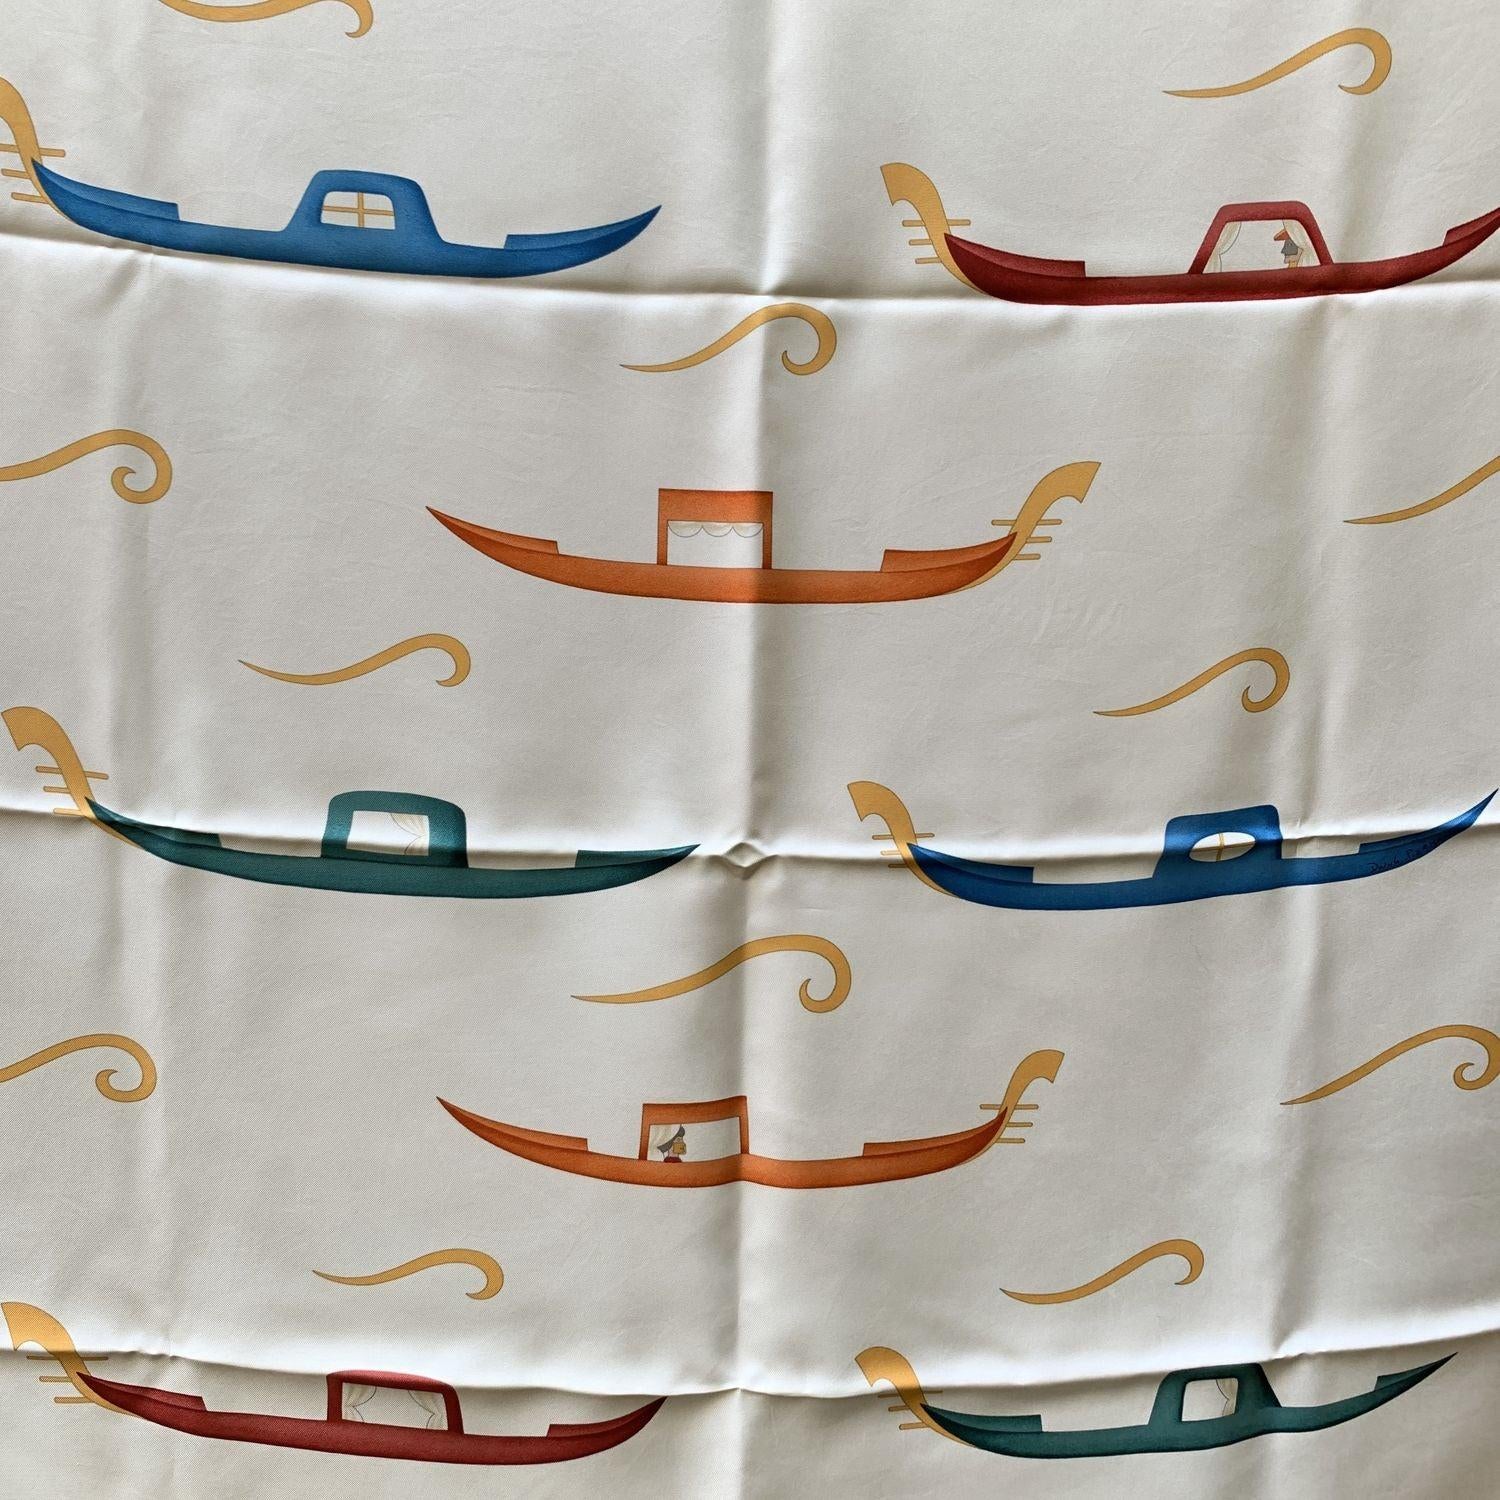 Beautiful vintage Bulgari silk scarf, titled 'Gondola' design. Black, yellow, white colors. 100% Silk. Approx. Measurements: 34 x 34 inches - 86,3 x 86,3 cm. Bulgari composition and care tag is still attached Details MATERIAL: Silk COLOR: Yellow